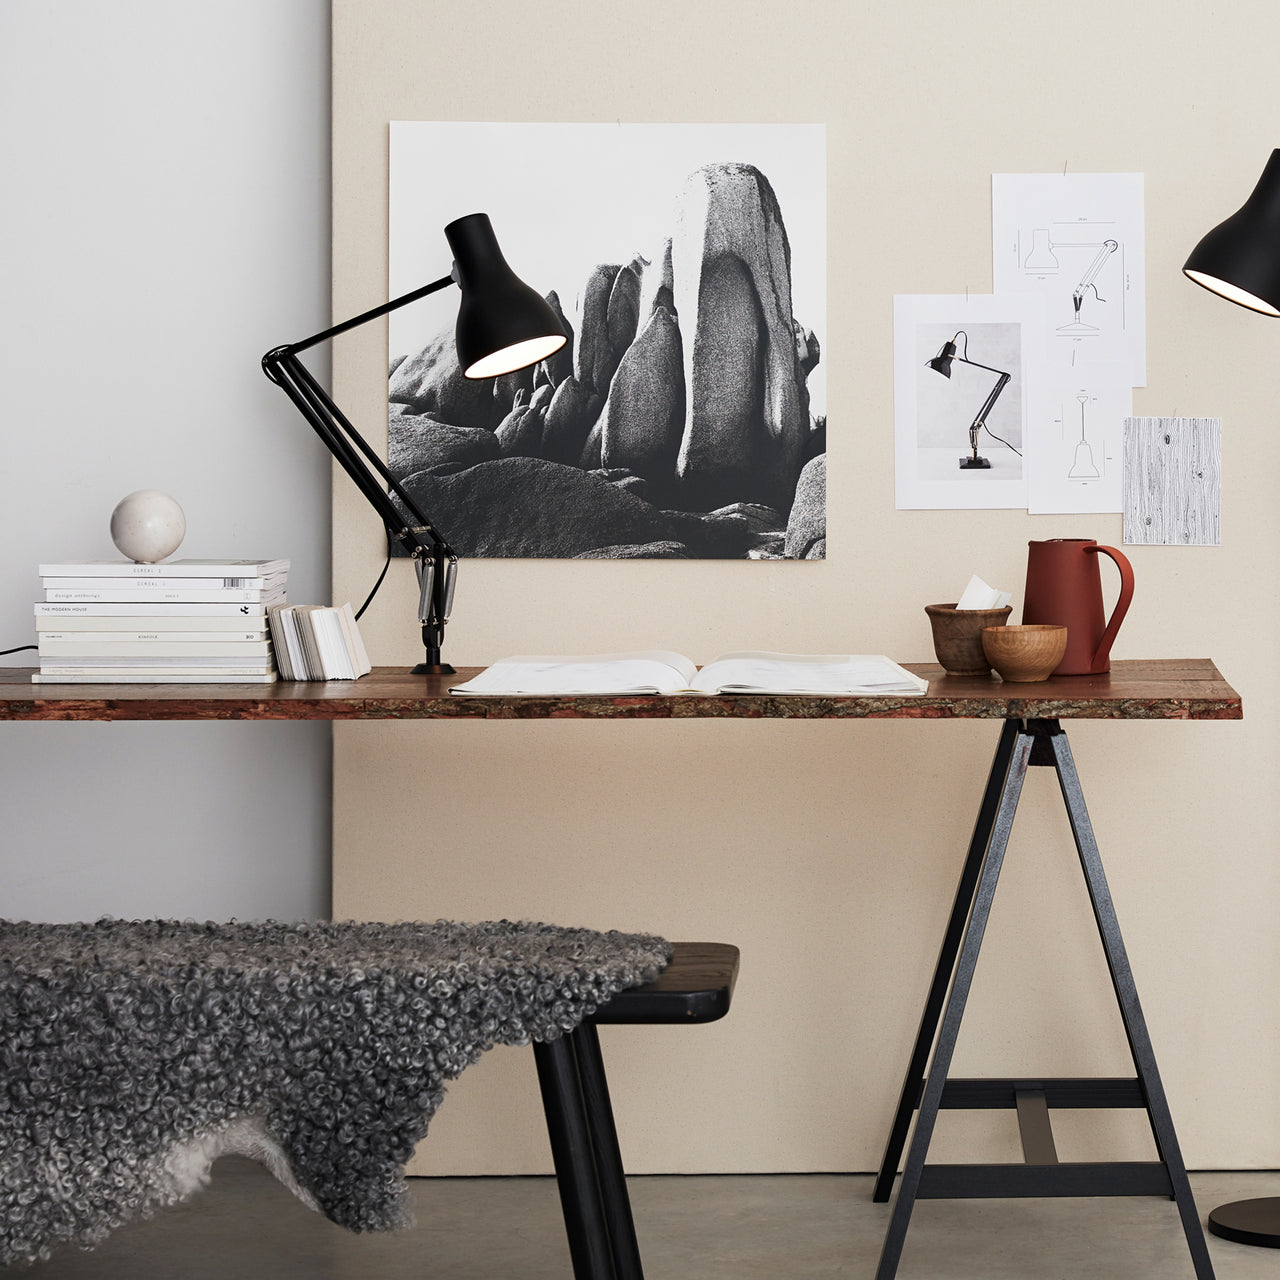 Type 75 Desk Lamp | Buy Anglepoise online at A+R